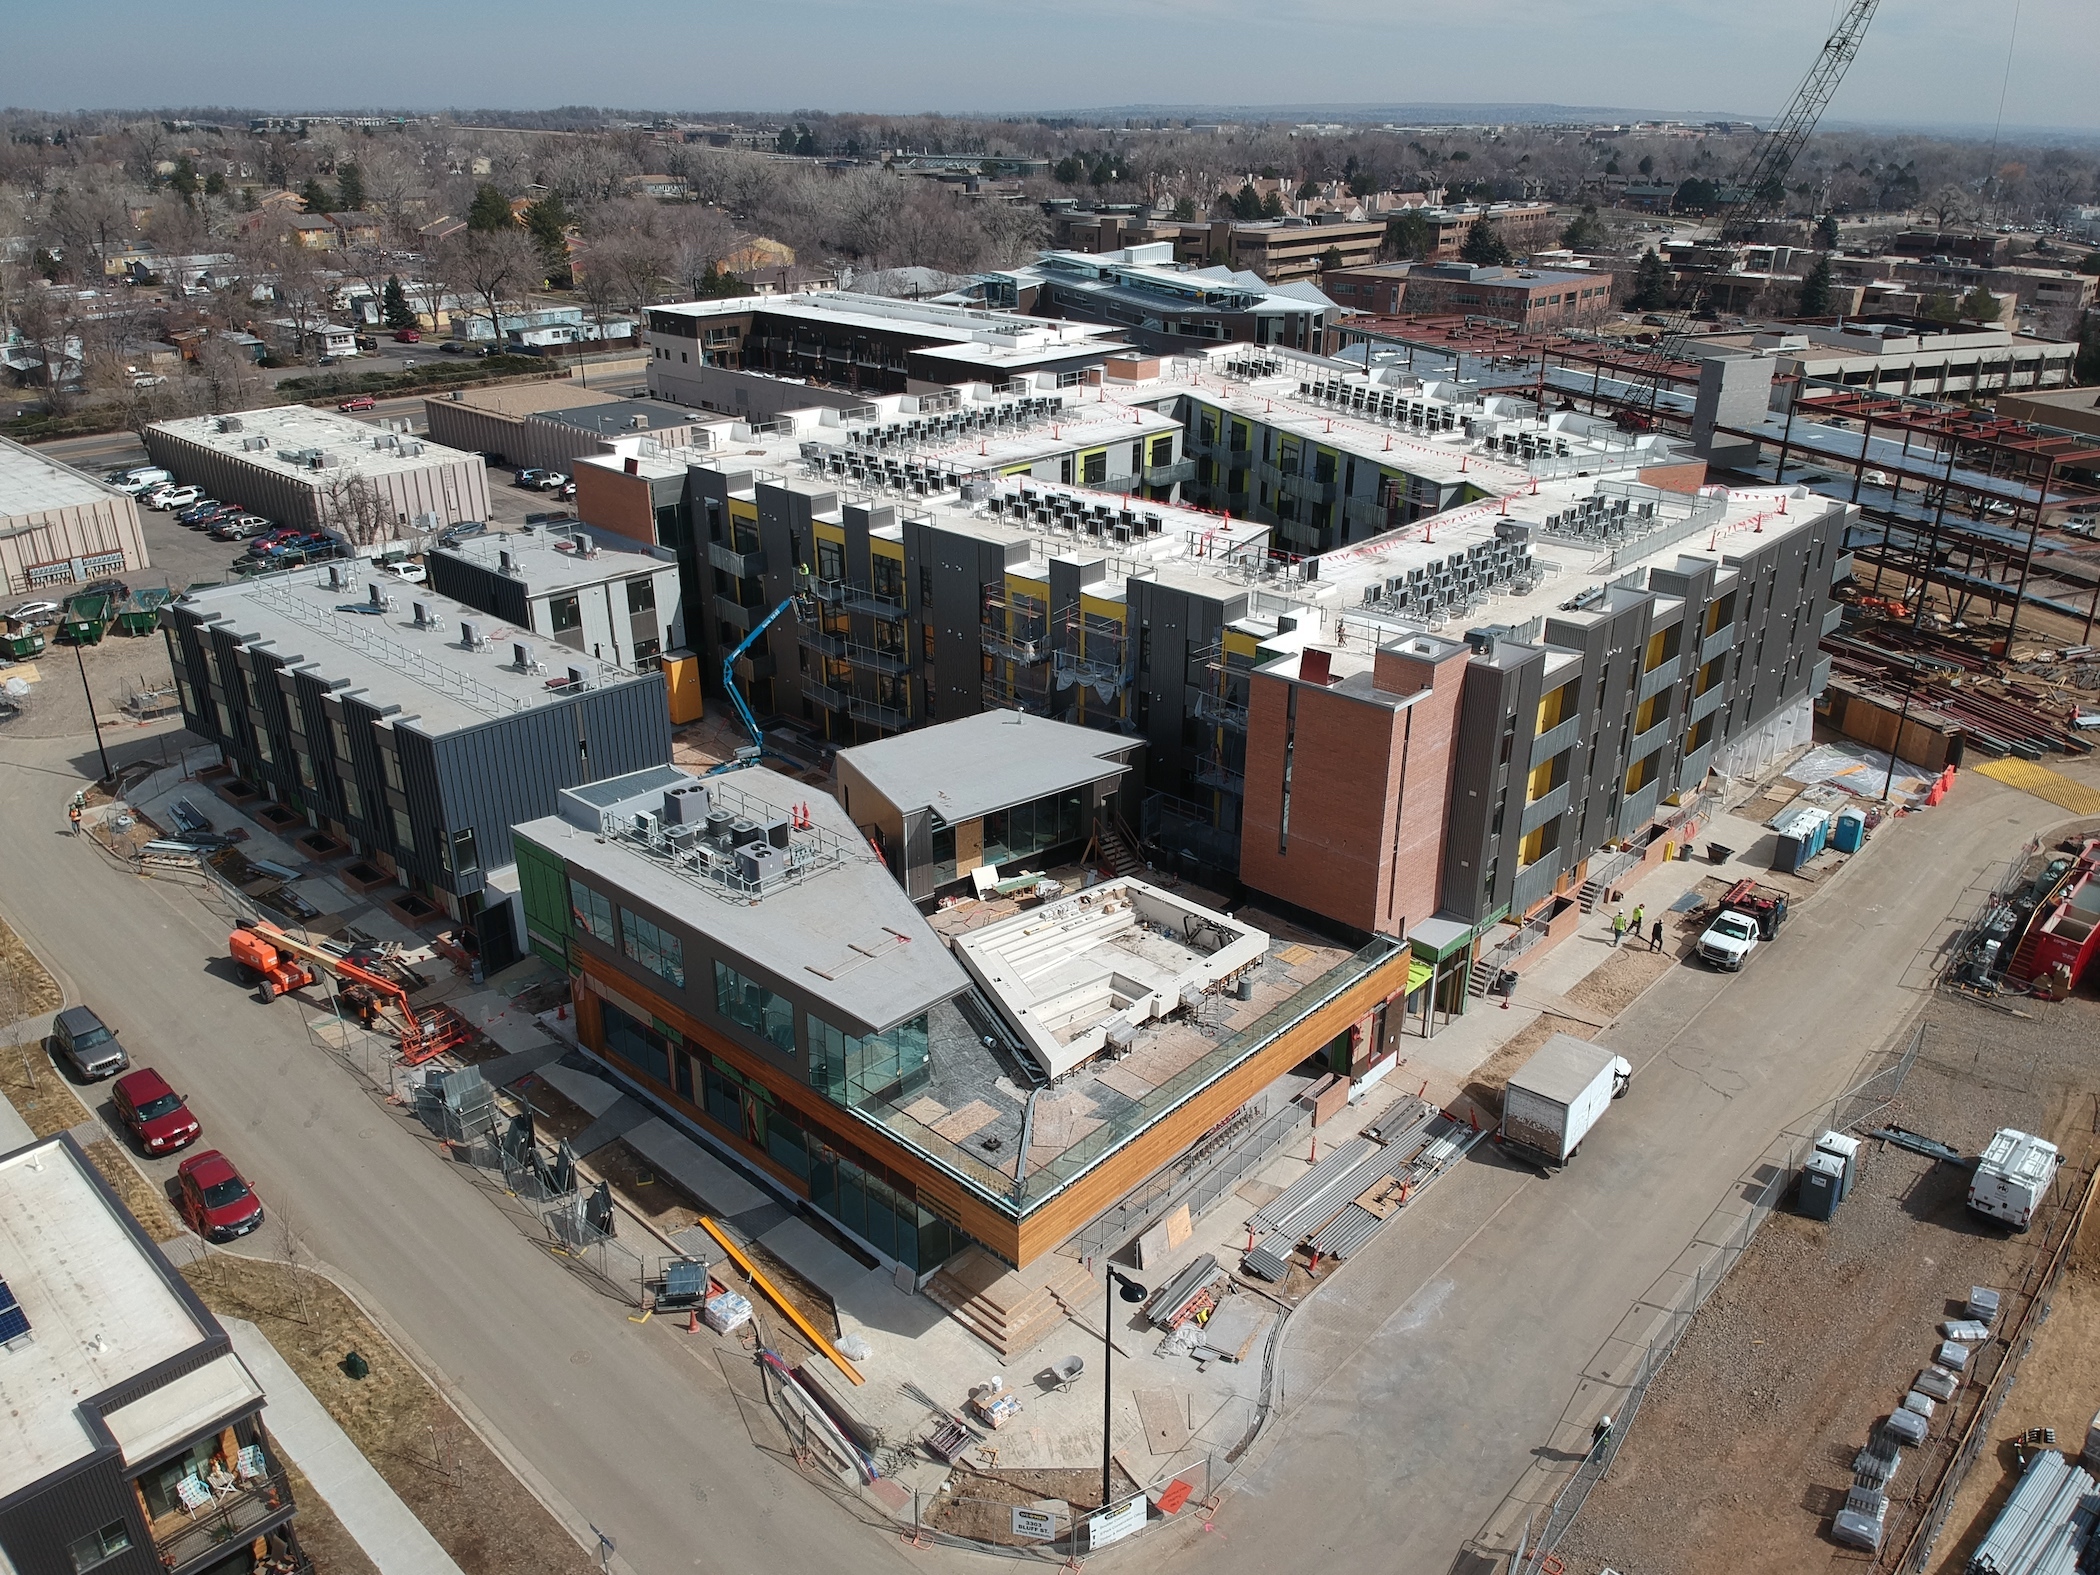 Twitter signed its 64,000-square-foot lease for office space at the Railyards at S’Park mixed-use complex in Boulder, Colorado, at the start of the pandemic. (CoStar)